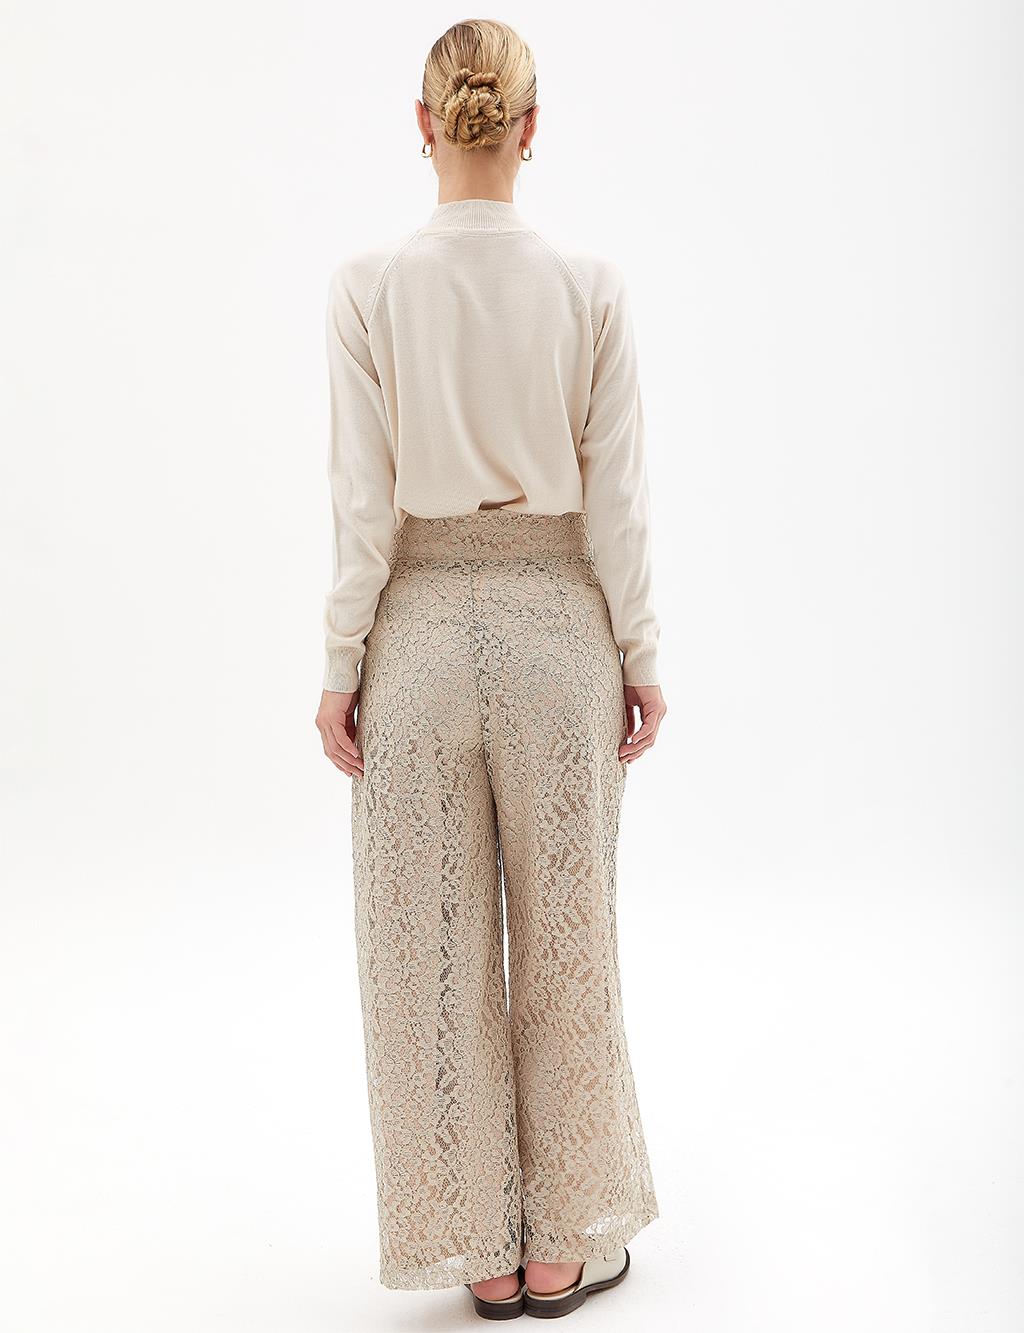 Lace Layered High-Waisted Pants in Cream